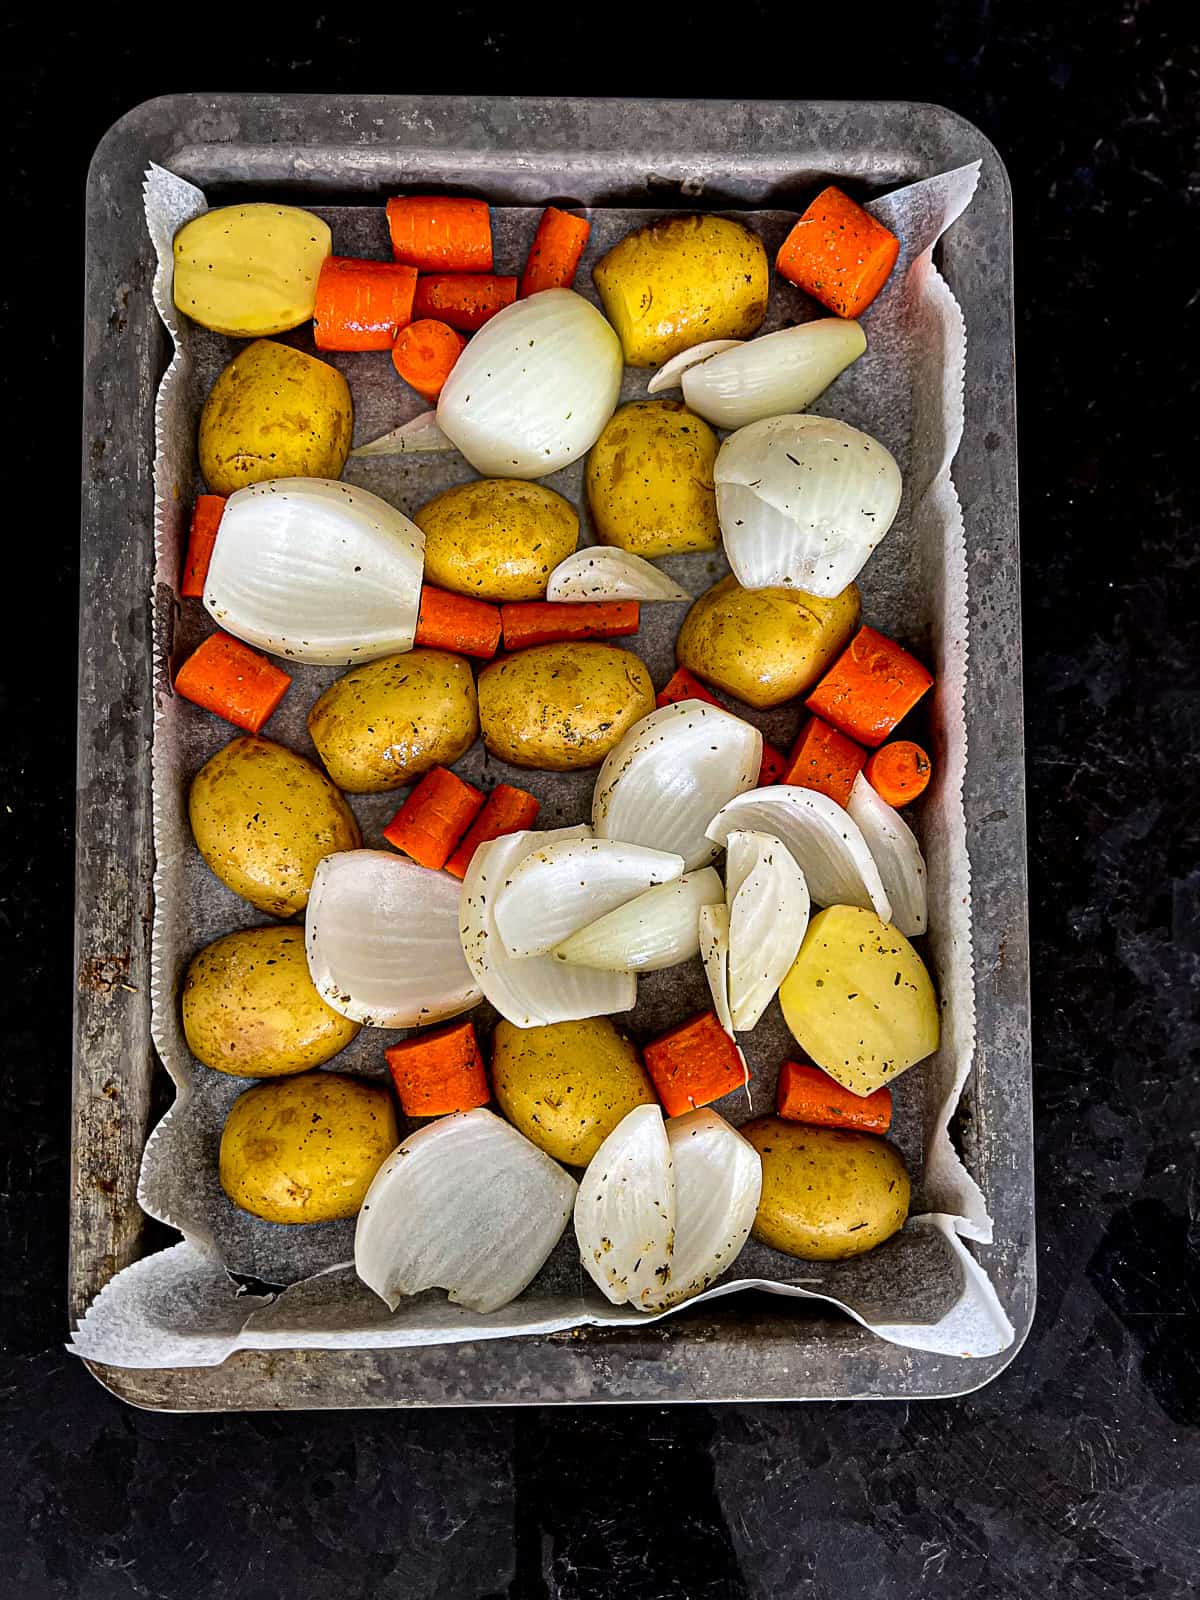 Potatoes Onions and Carrots on a Roasting Tray